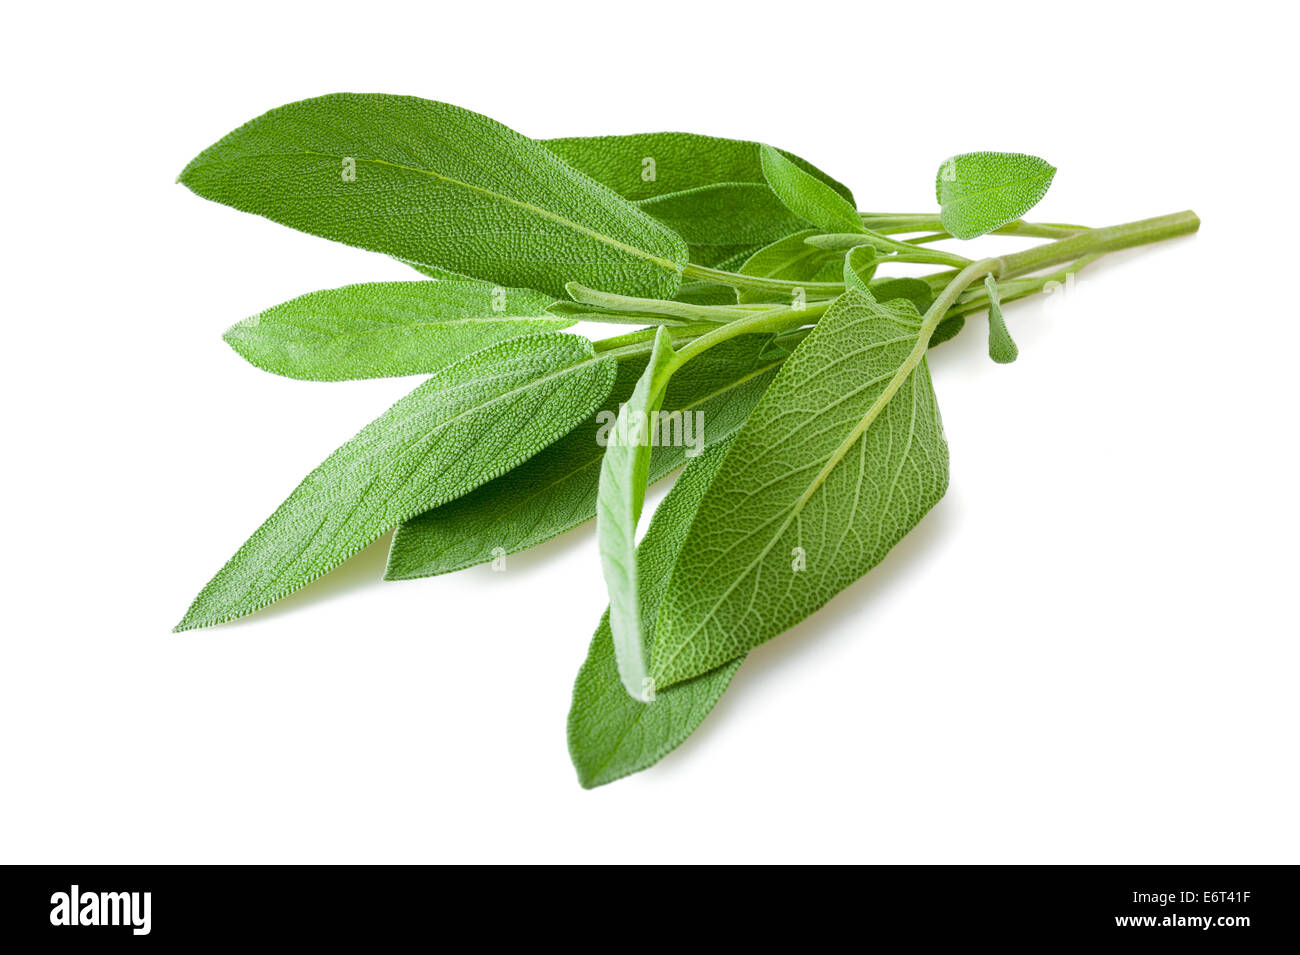 Sprig of Sage Salvia Officinalis with Flowers and Leaves Isolated on